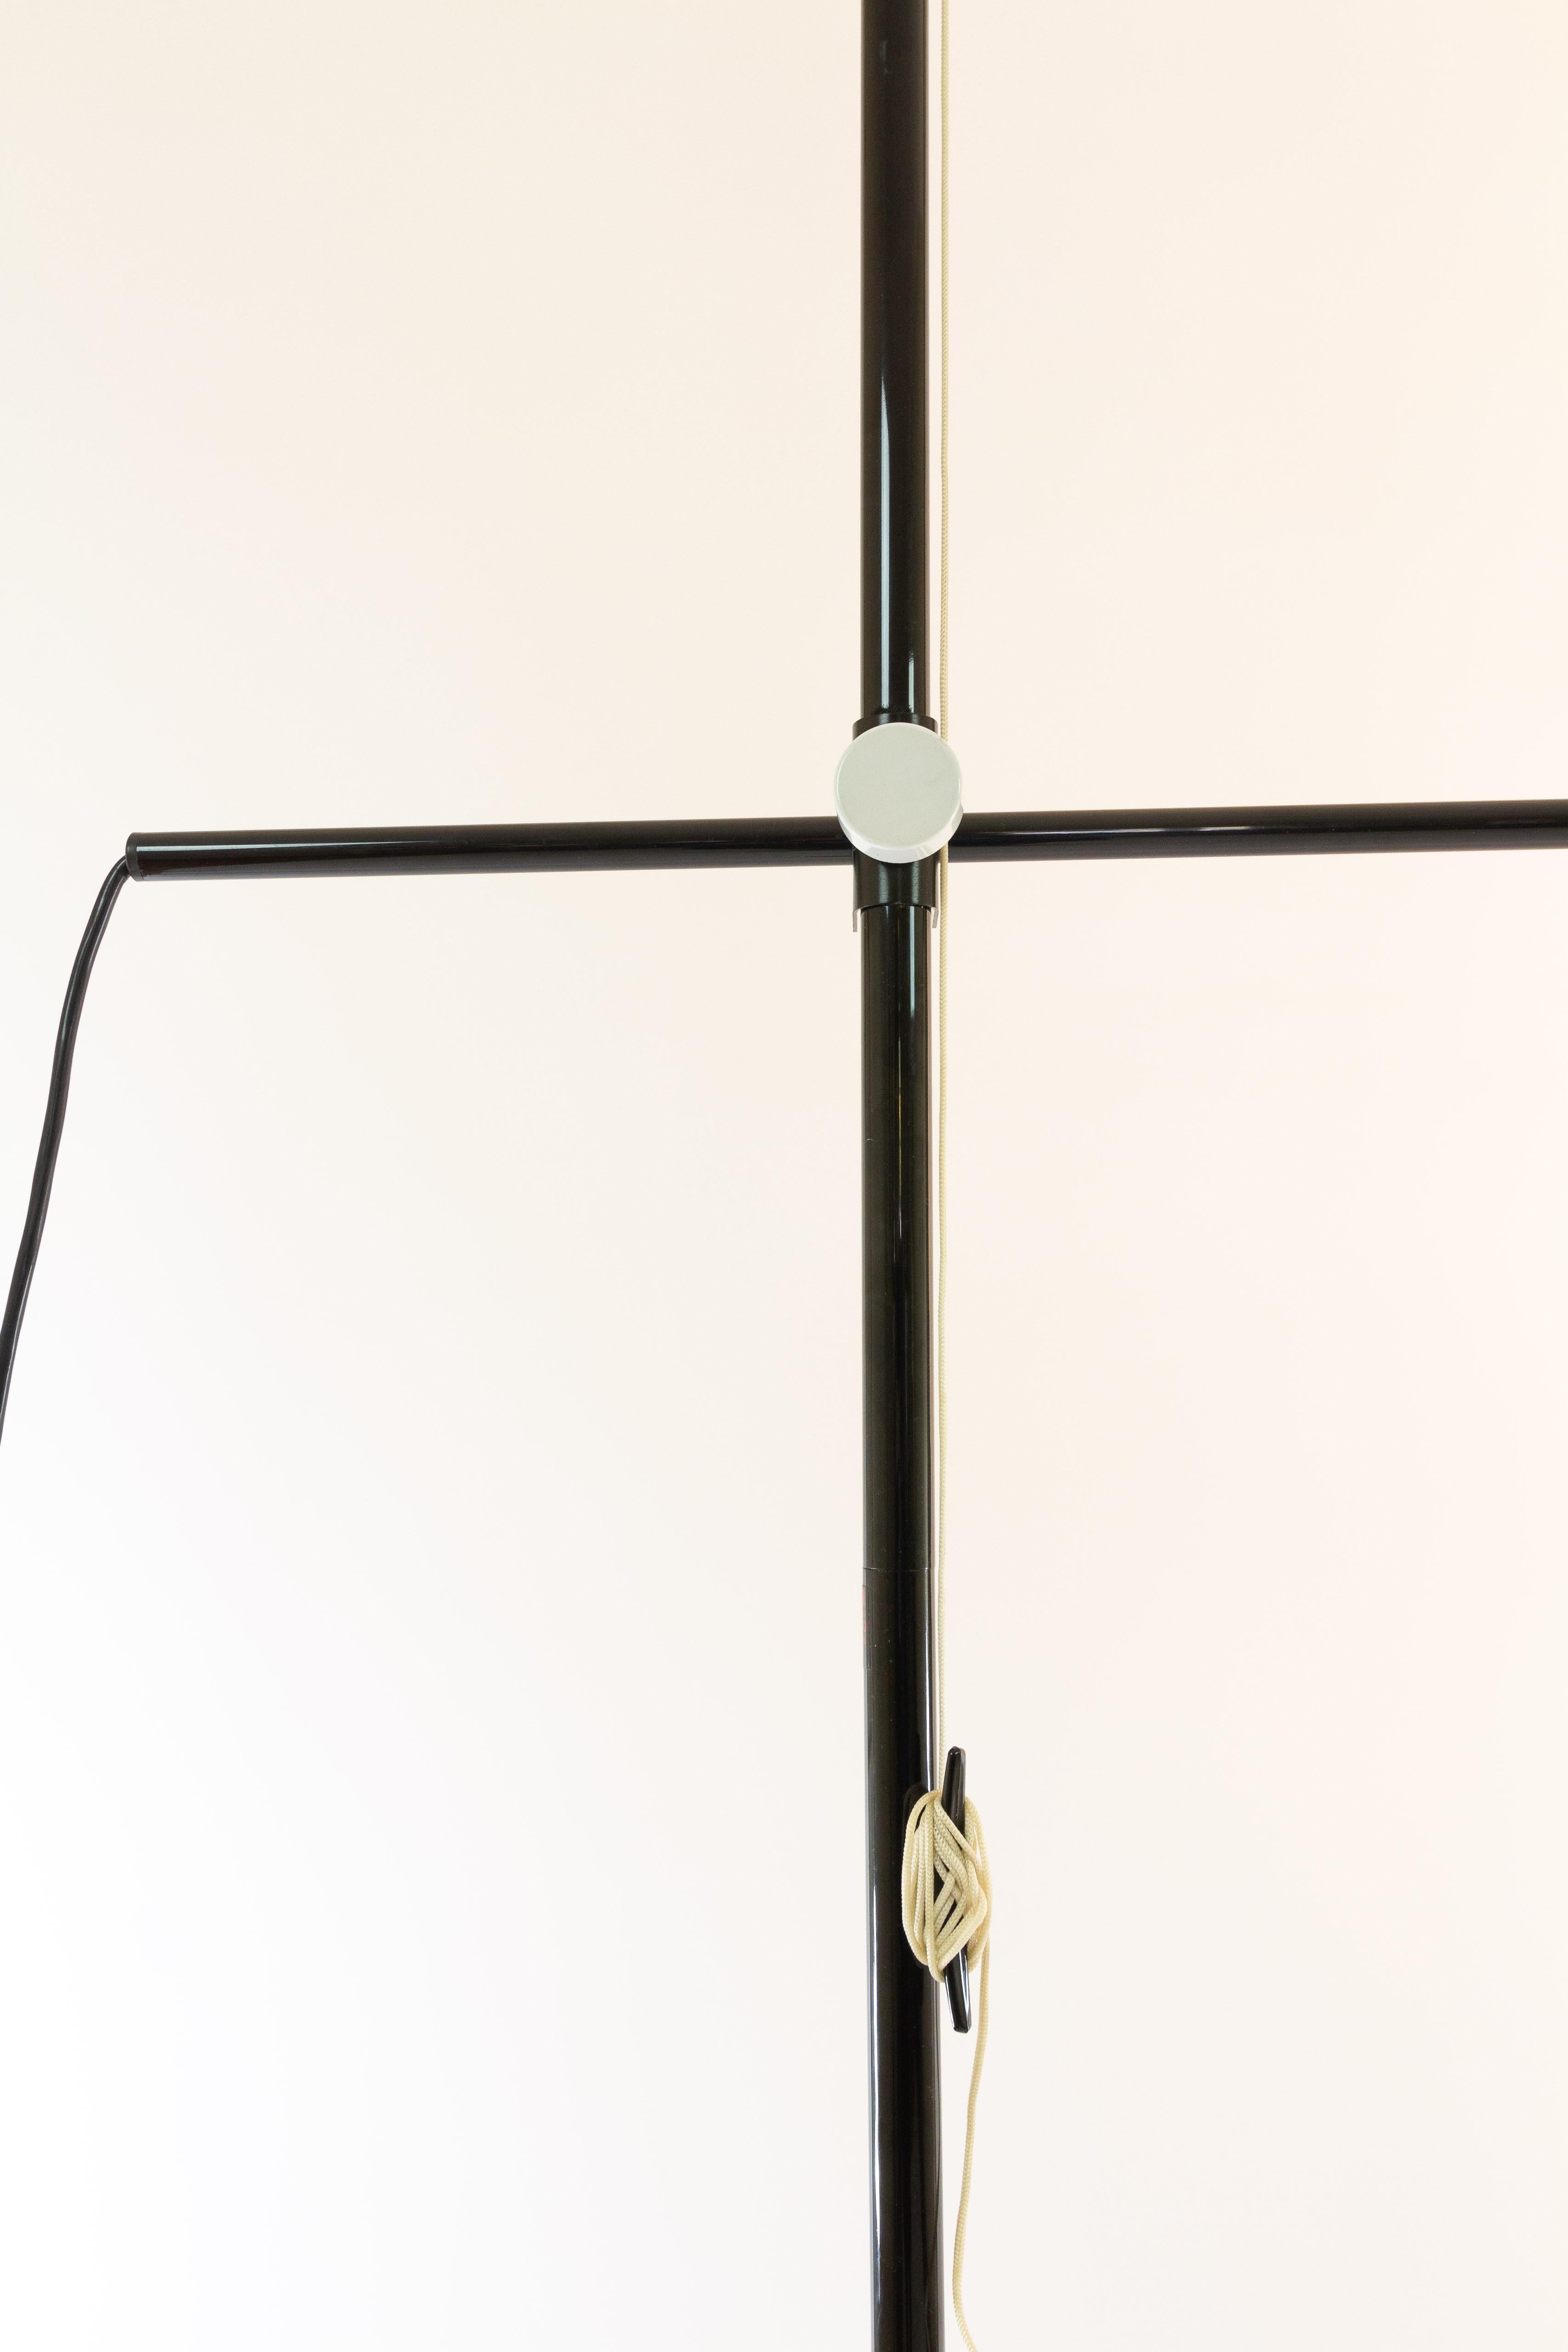 Mid-Century Modern Bigo Floor to Ceiling Lamp by S.T. Valenti for Valenti, 1980s For Sale